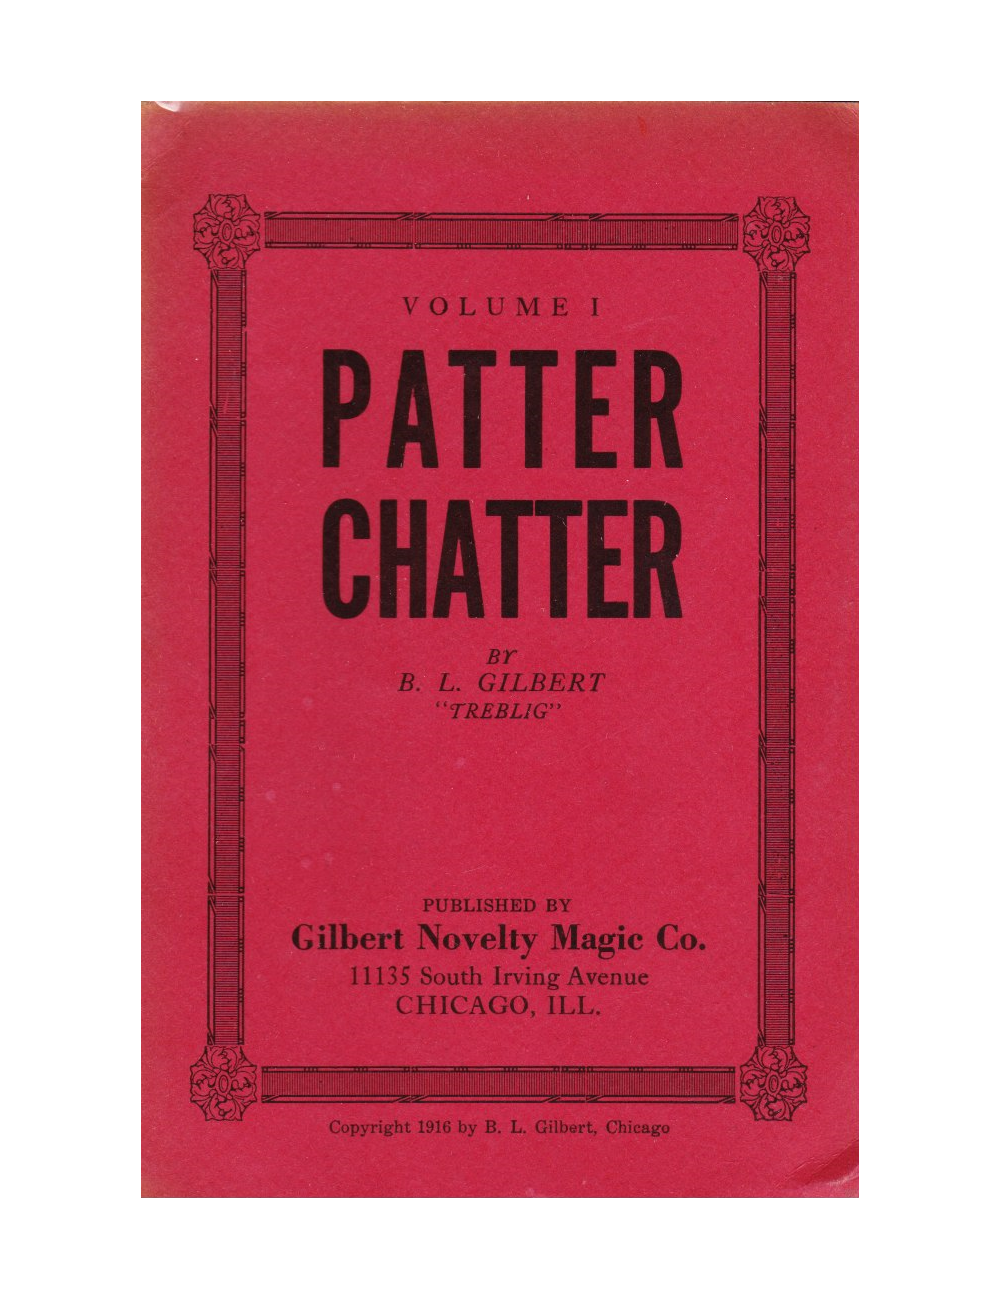 PATTER CHATTER VOLUME 1 BY B. L. GILBERT